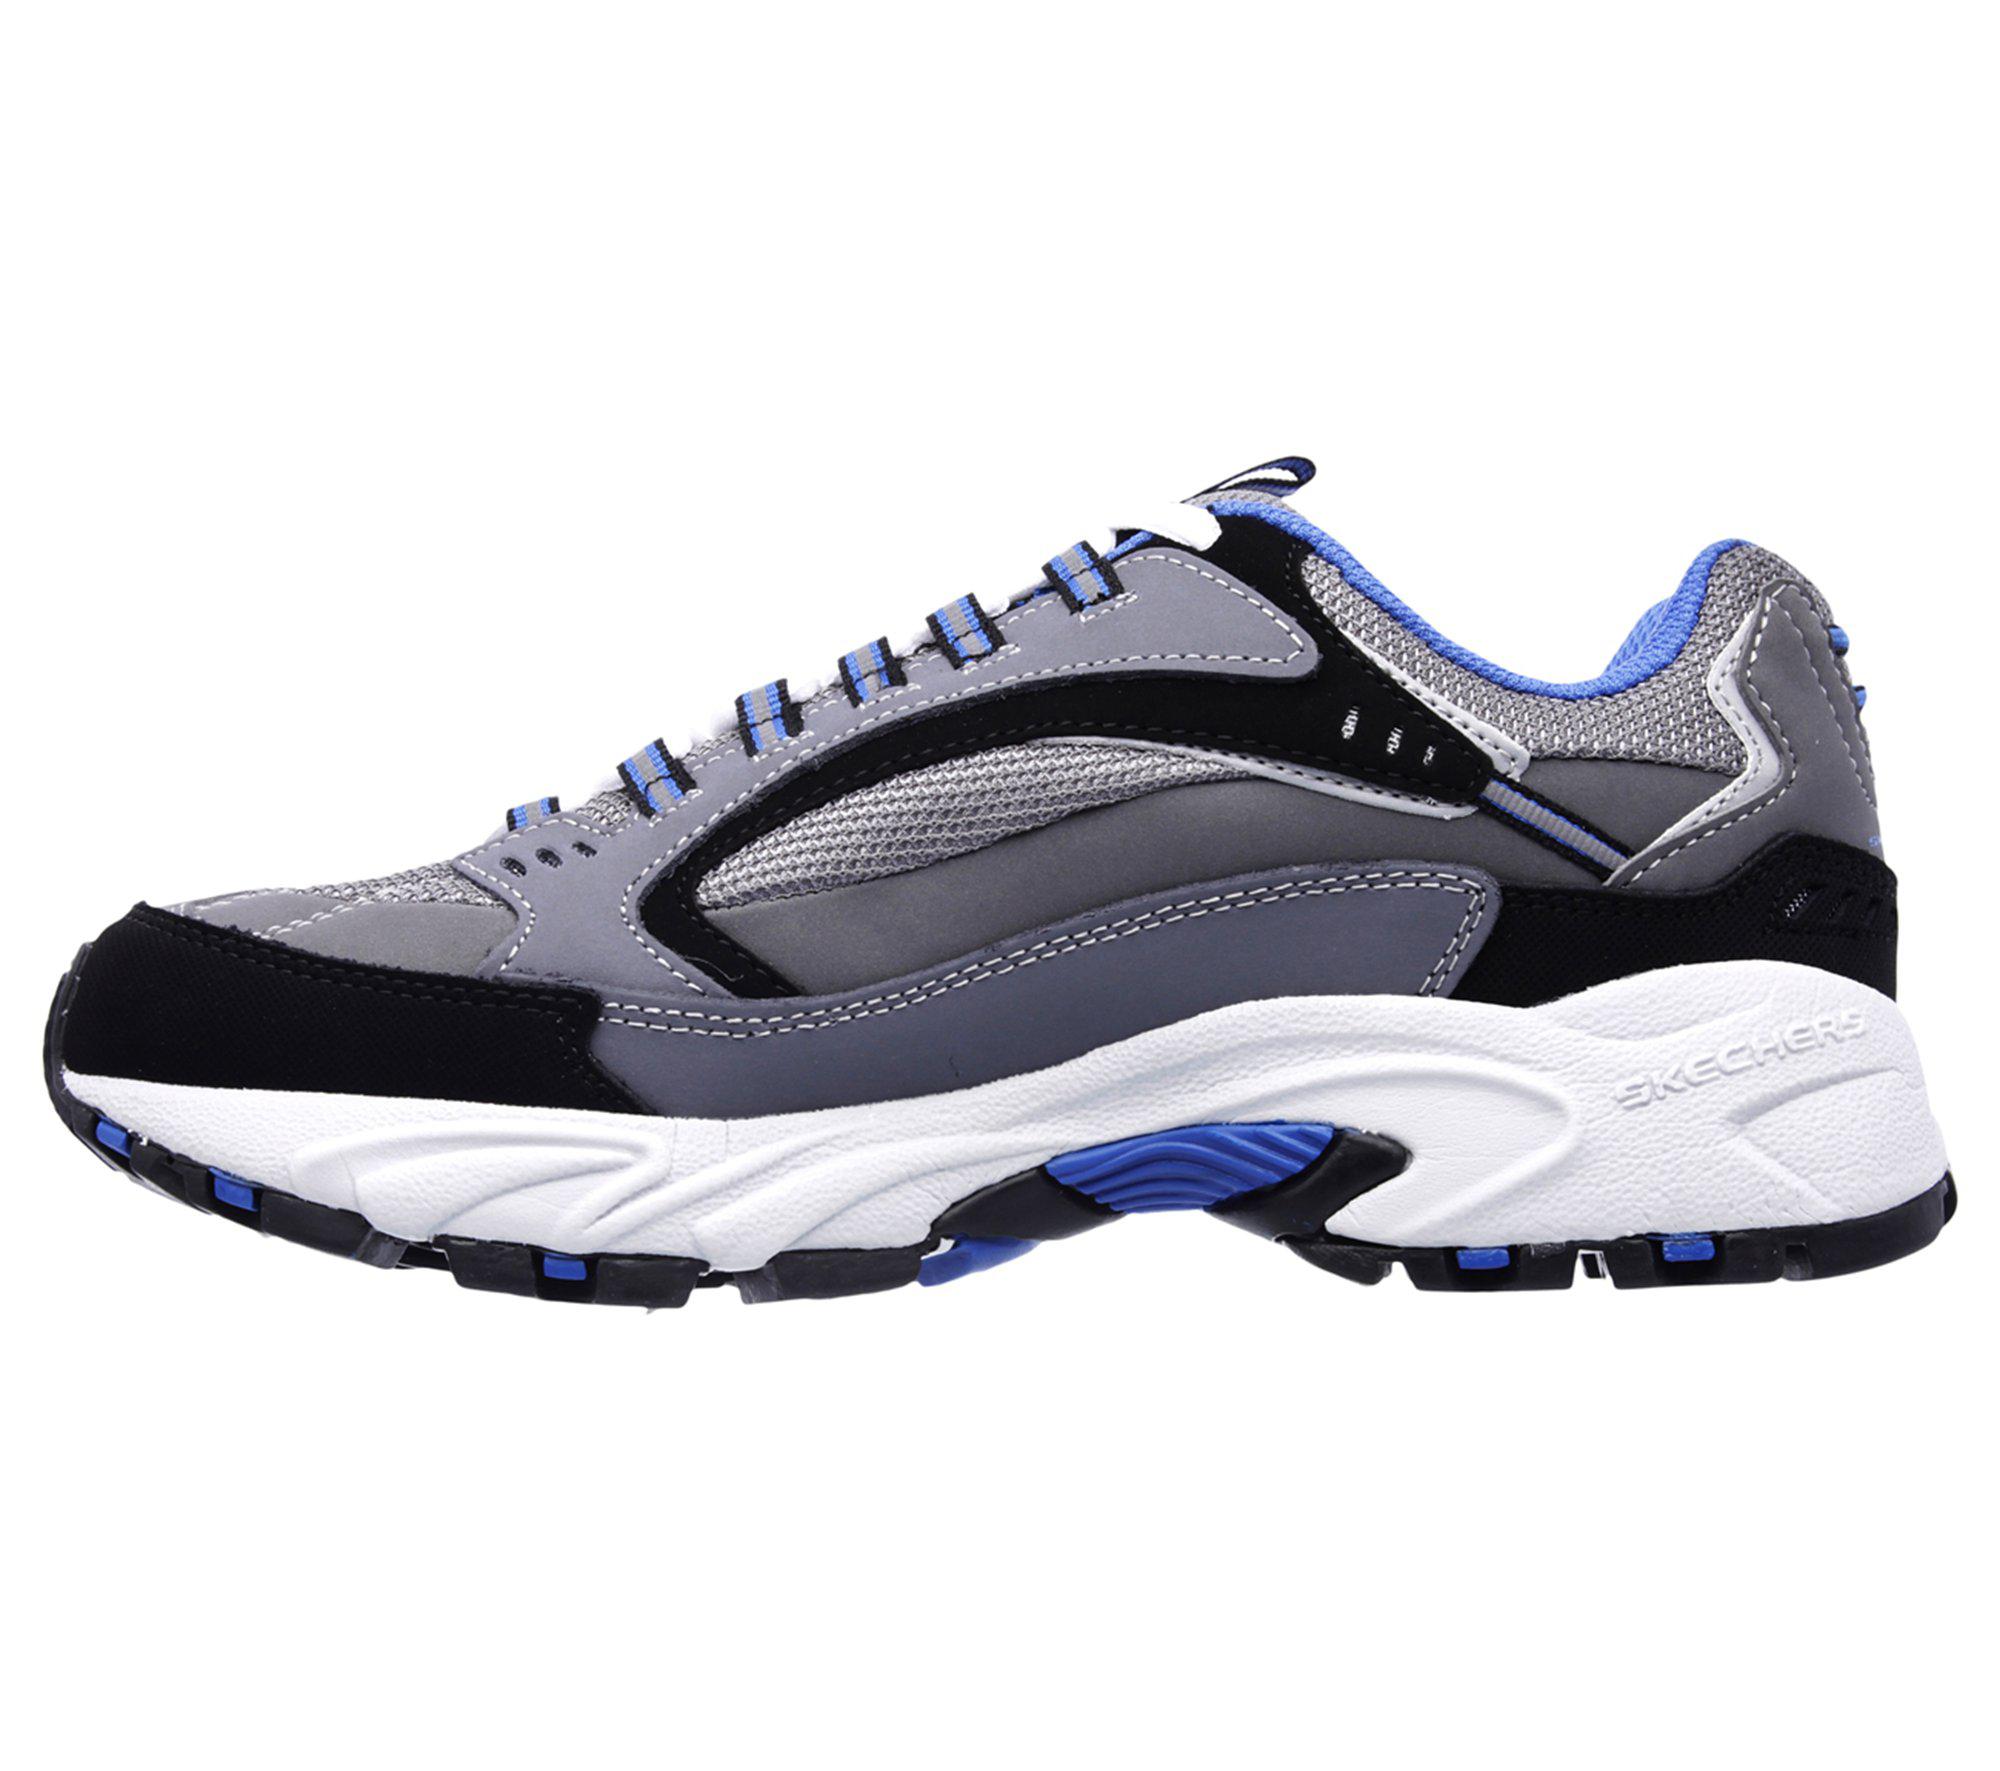 Skechers Leather Stamina - Cutback in Blue Gray (Blue) for Men - Lyst